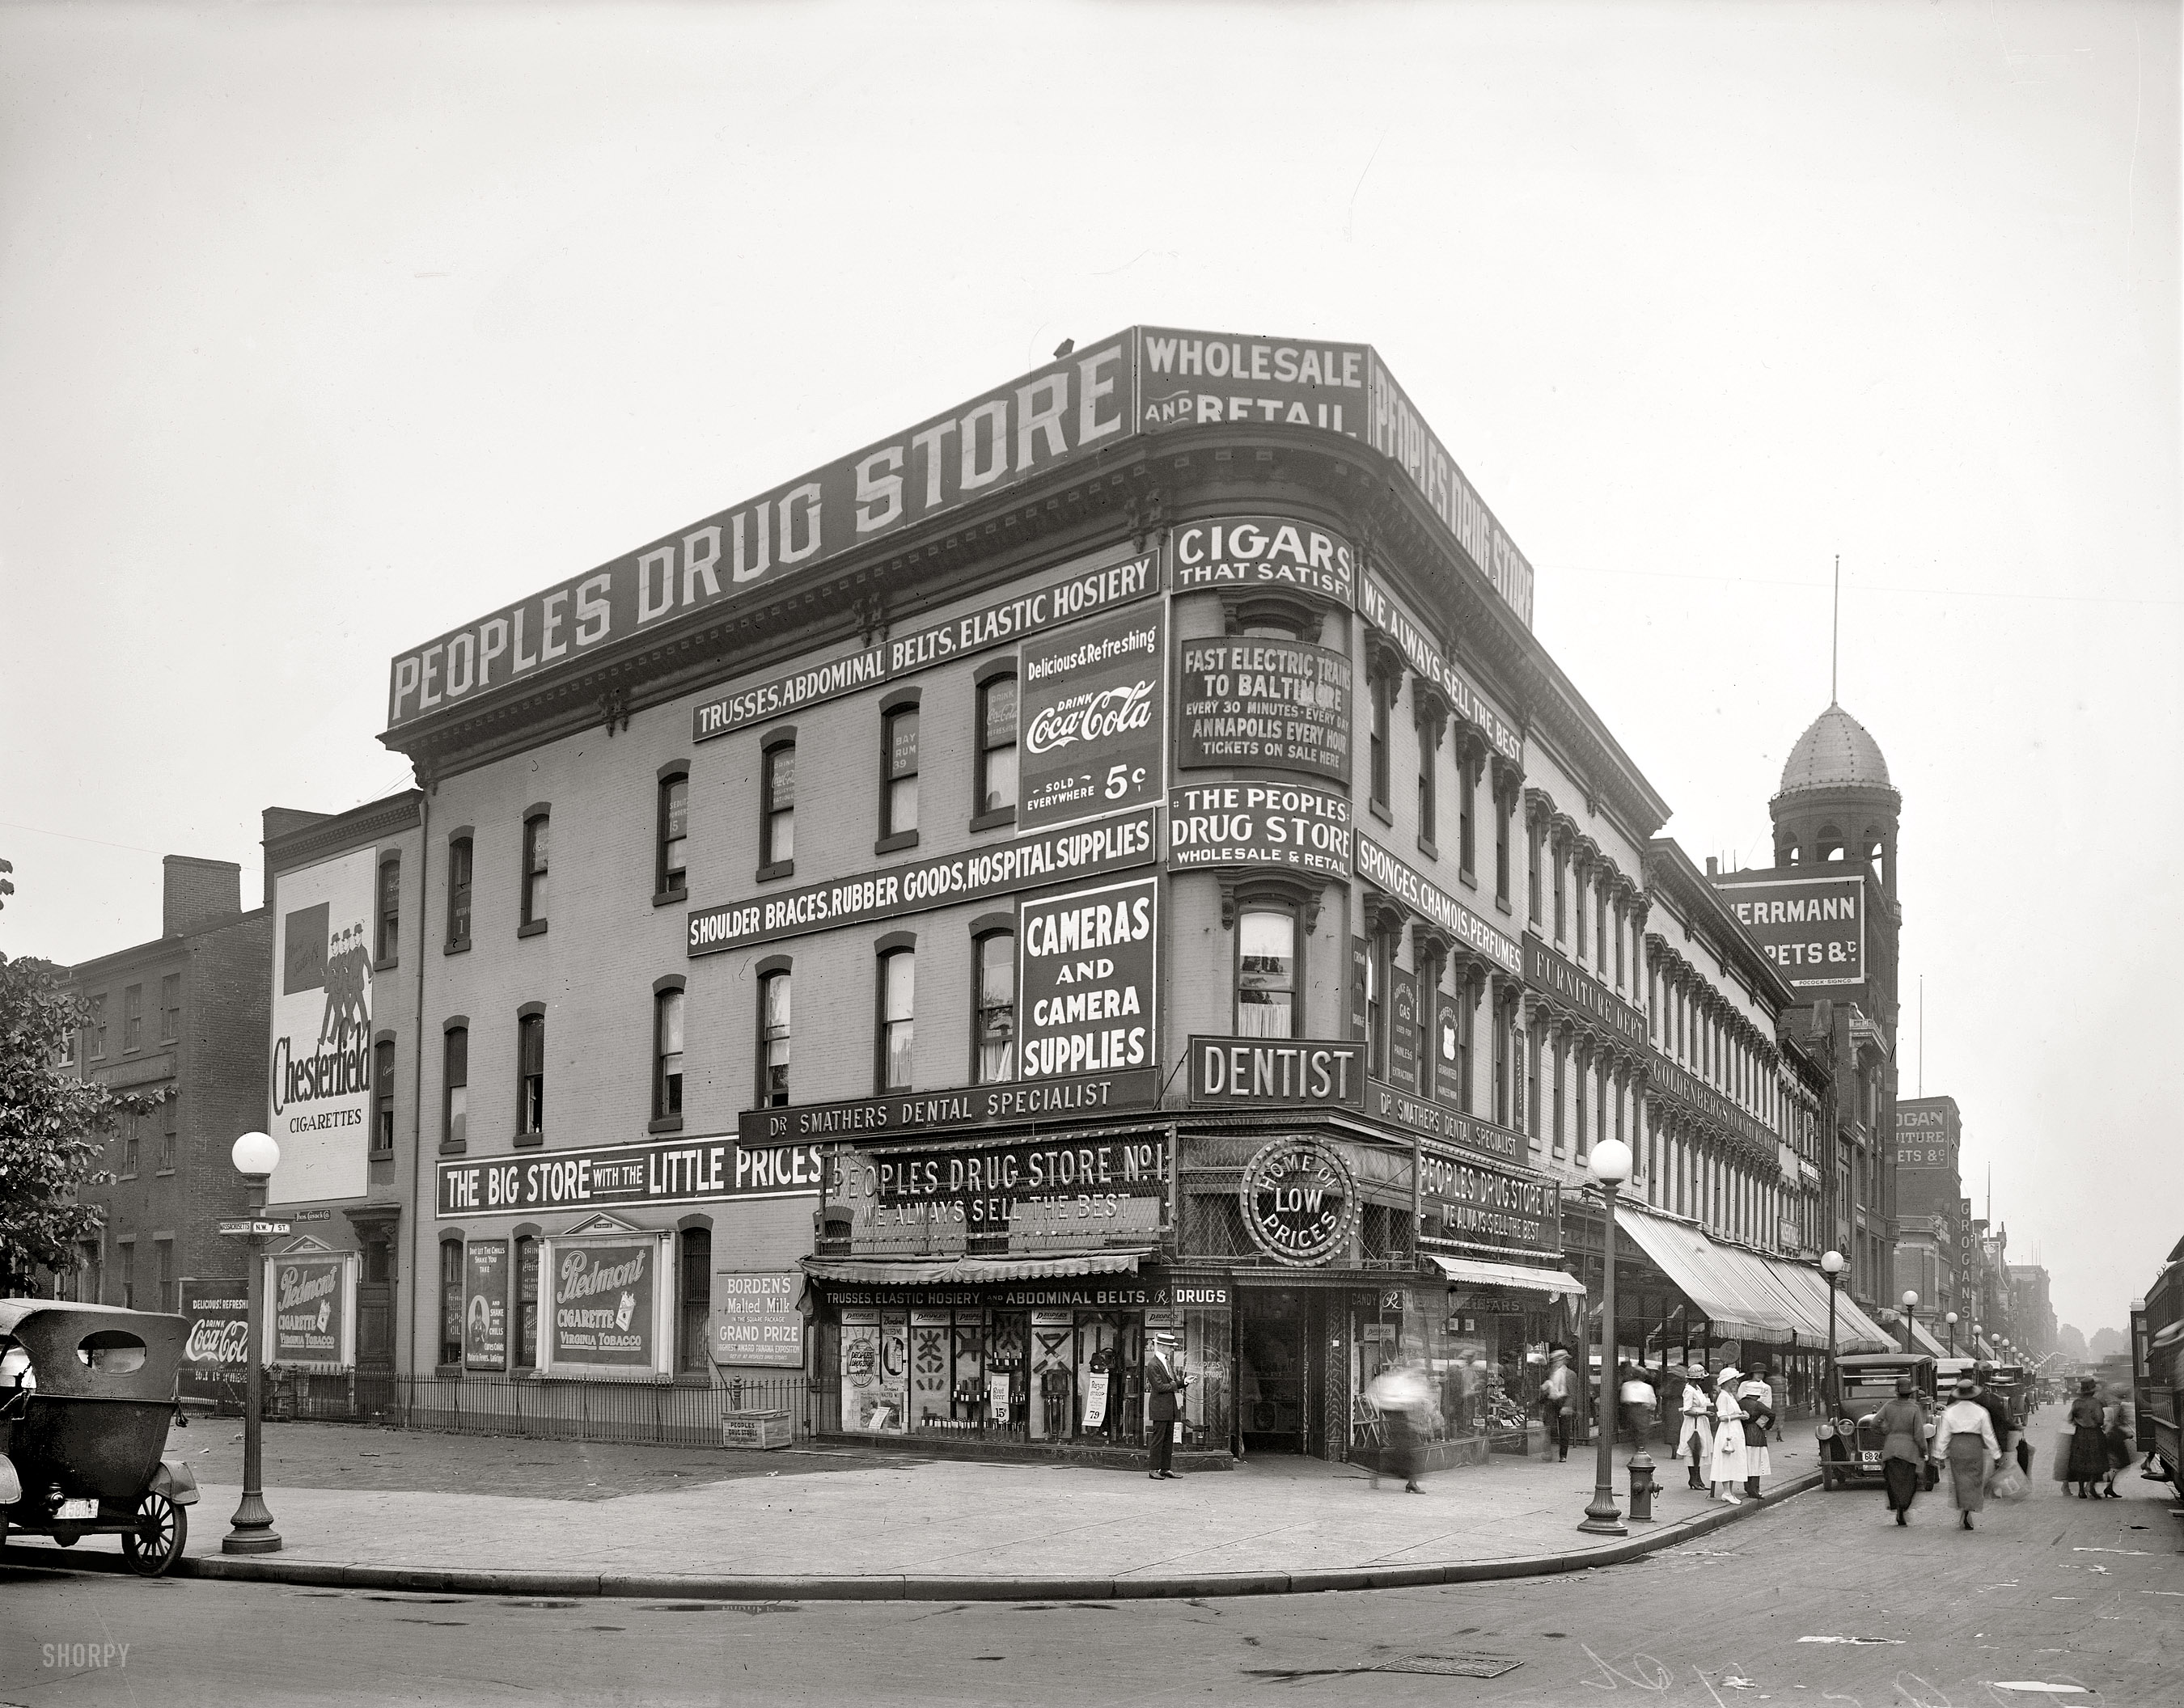 Washington, 1921. "People's Drug Store, 929 Seventh Street N.W., exterior." The scene at Mass and Seventh, evidently the hernia capital of our nation's capital. National Photo Company Collection glass negative. View full size.